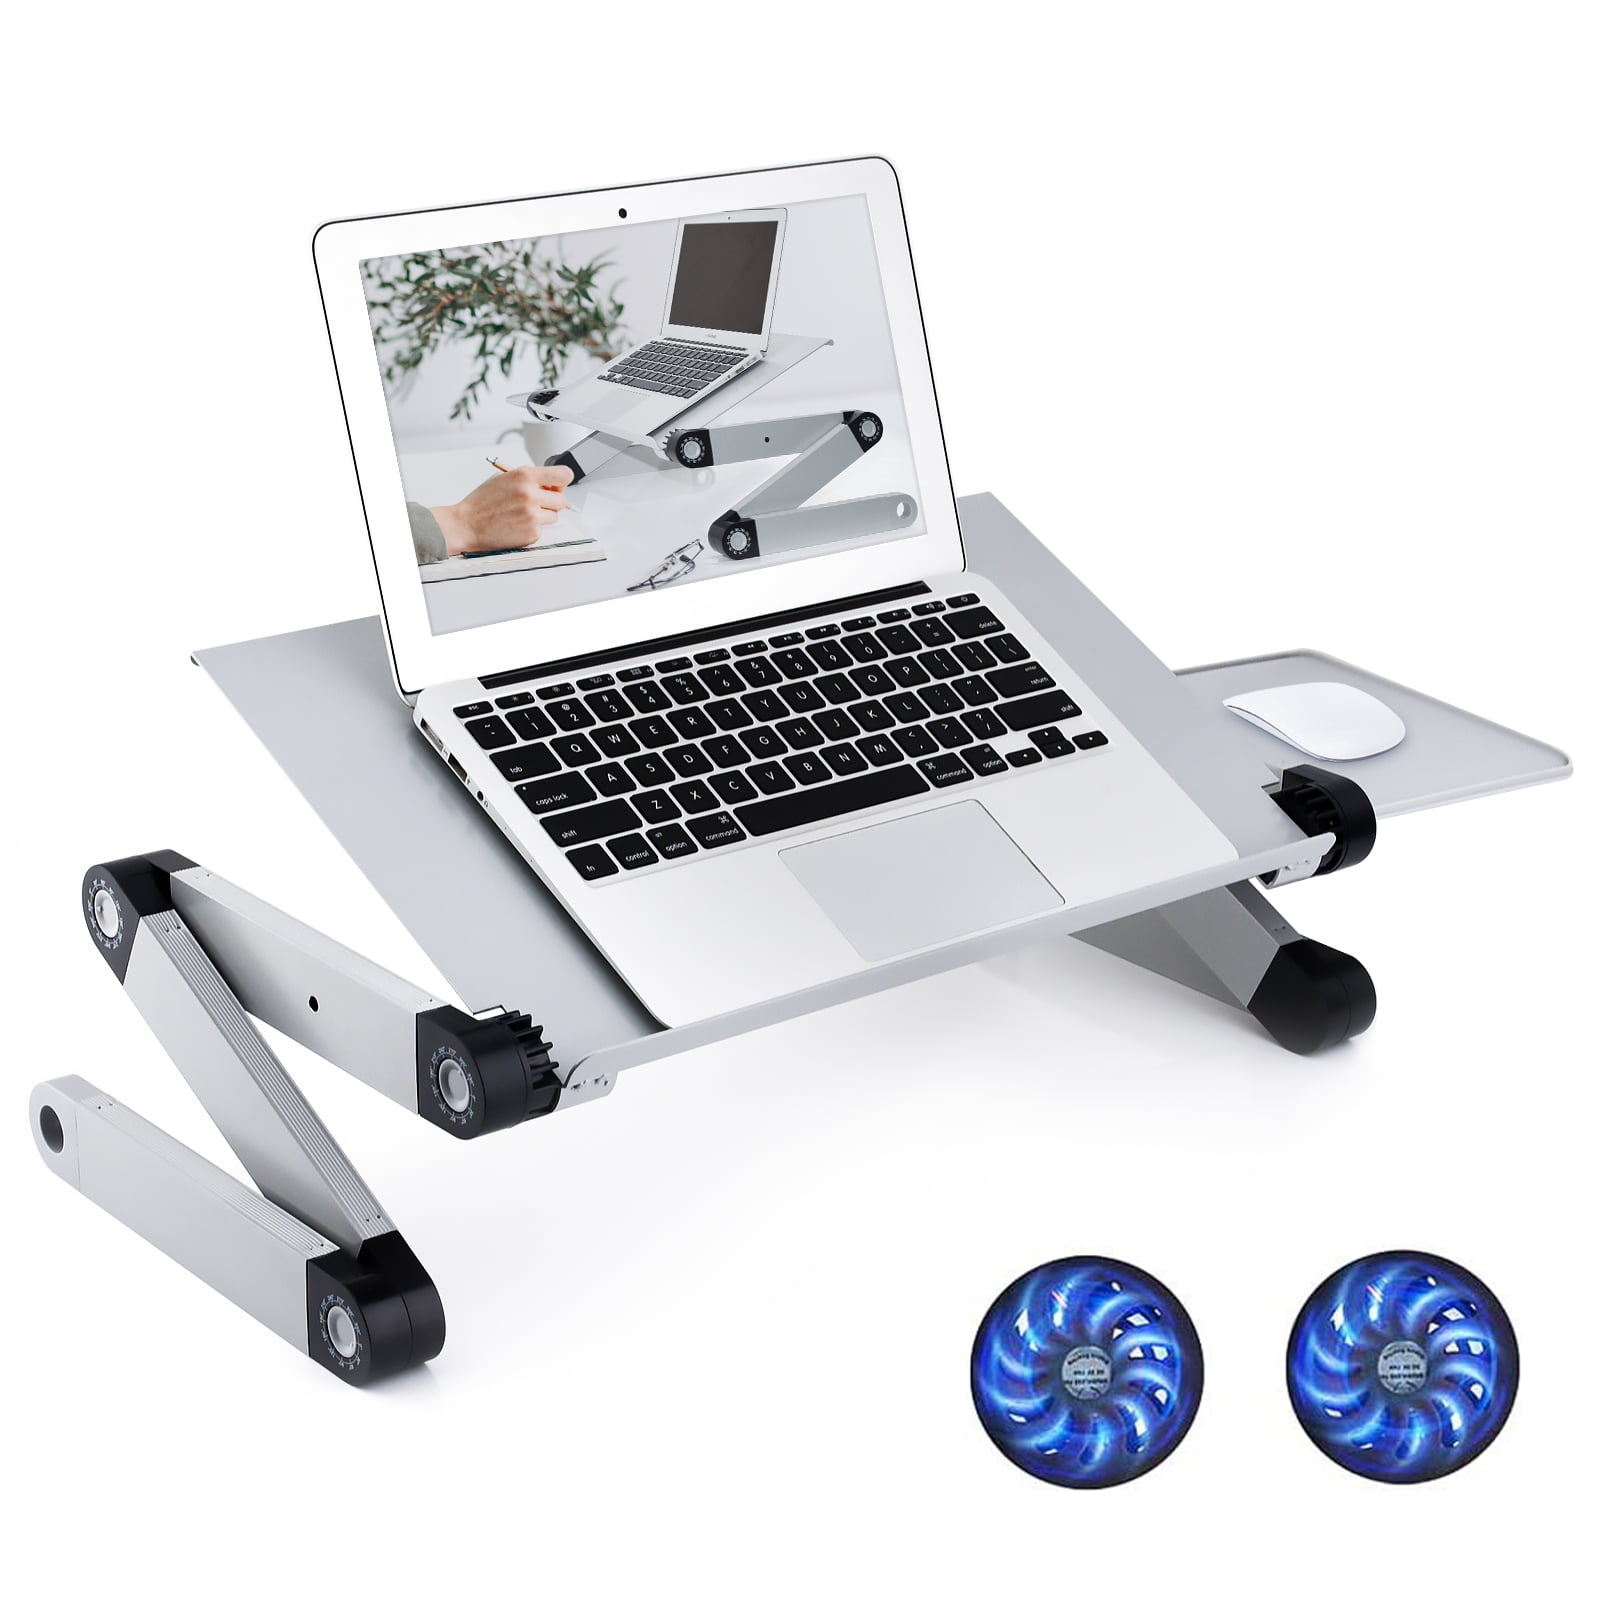 Adjustable Laptop Stand Desk Laptop Tablet Bed PC Holder Notebook W/ Mouse Tray